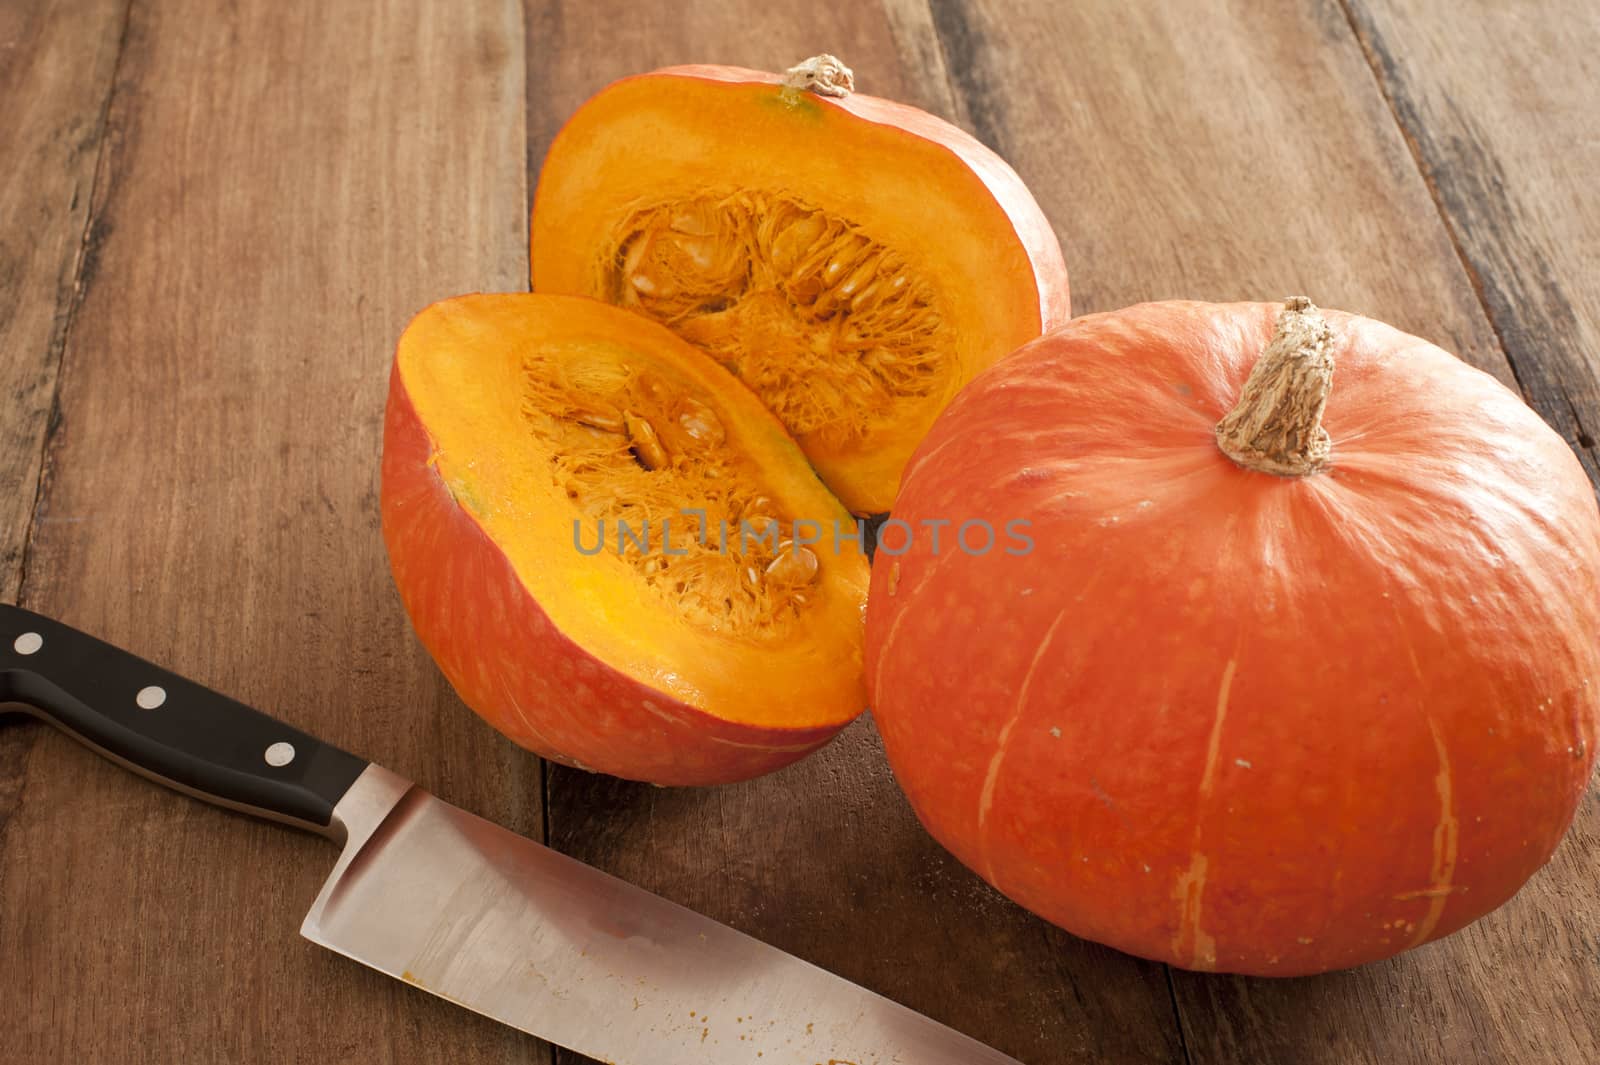 Small round oddly shaped pumpkin cut in middle beside bigger one and a large sharp knife